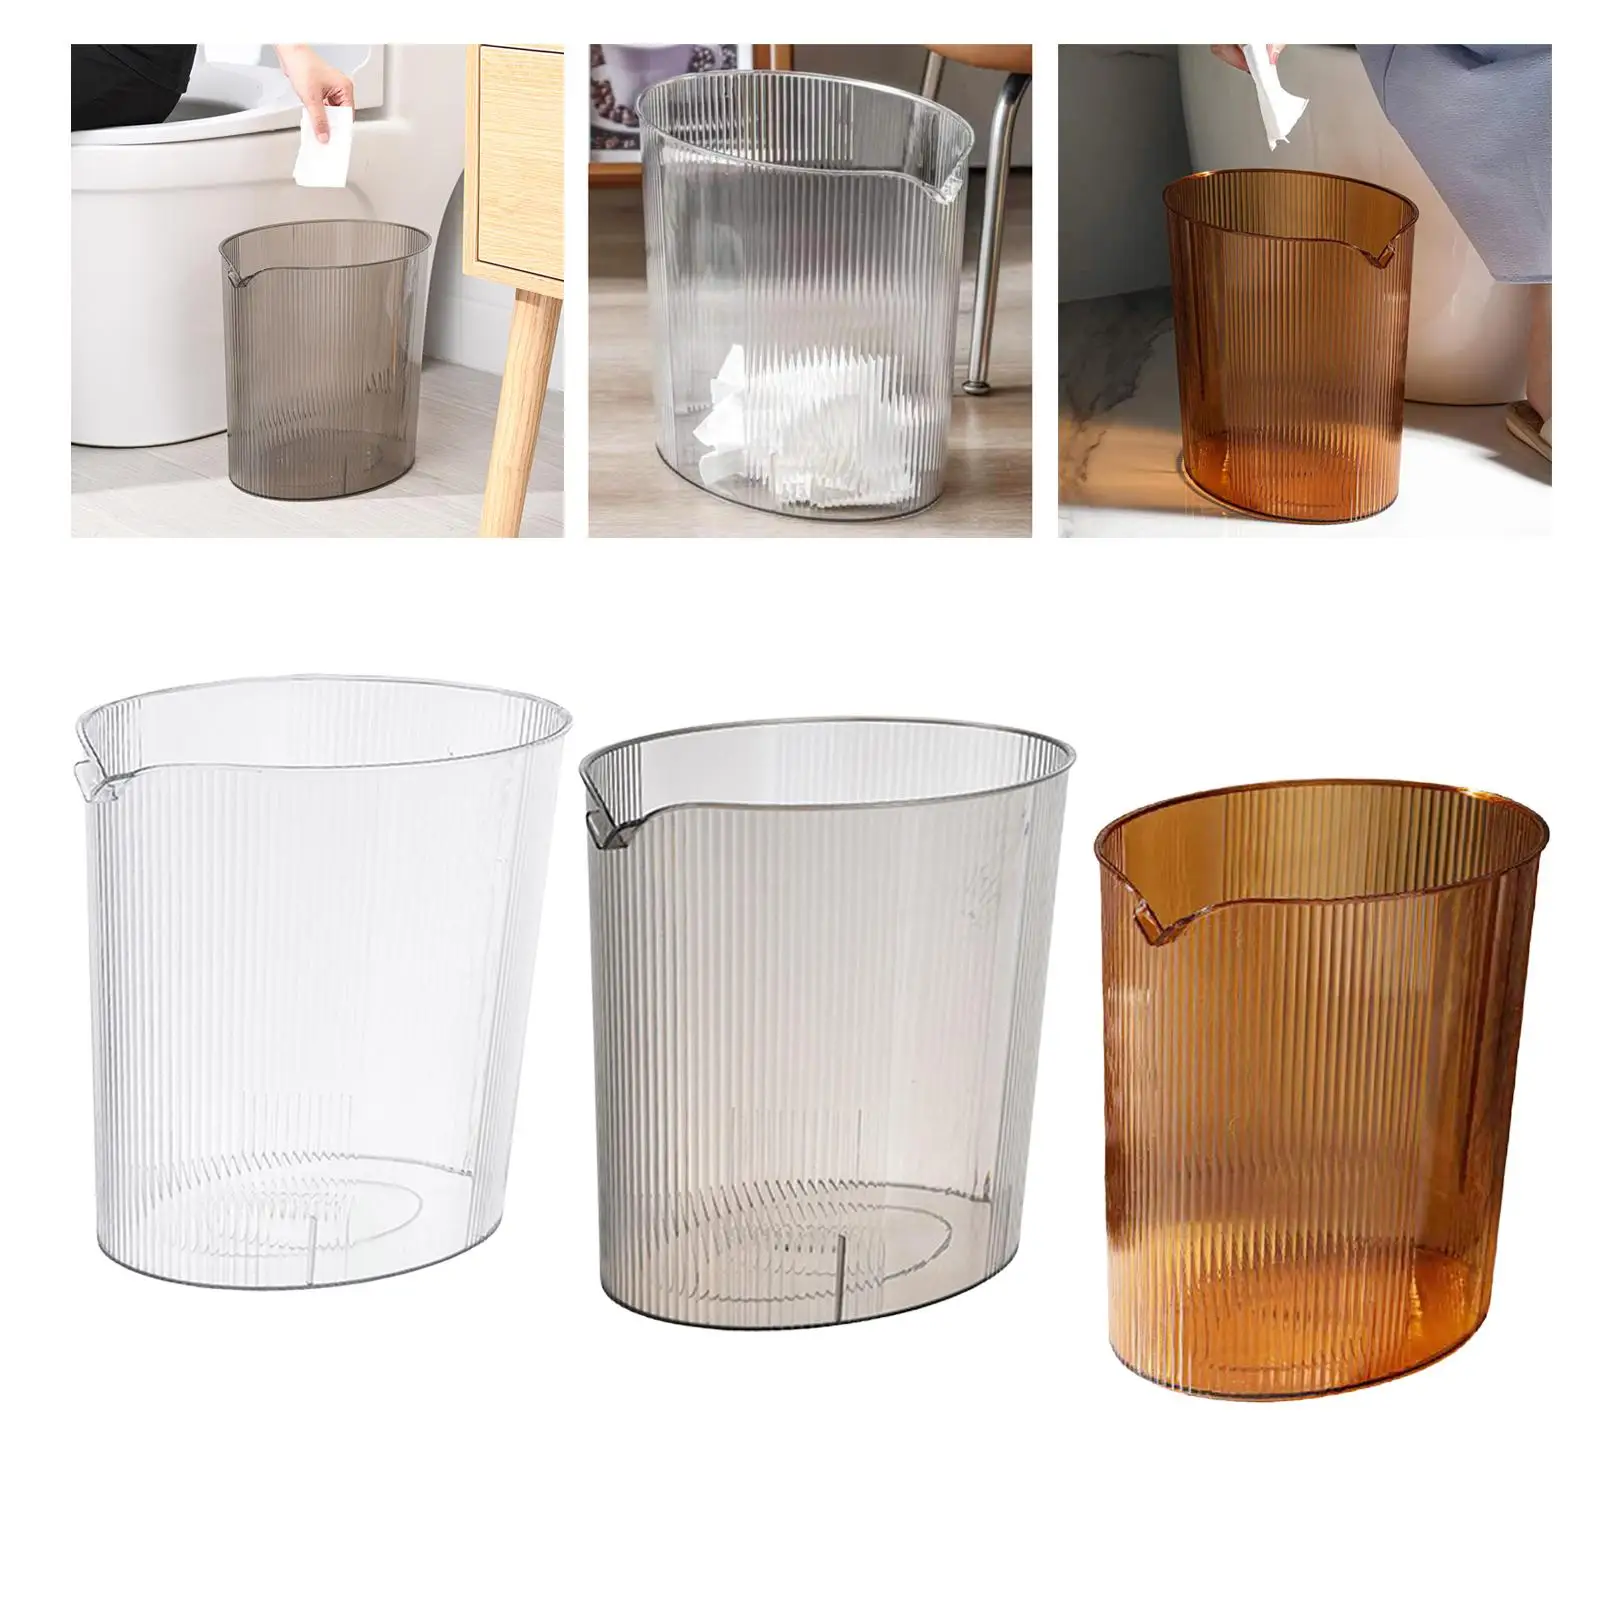 Minimalist Style Trash Can Dustbin Without Cover Transparent Waste Paper Basket Wastebasket Trashcan for Home Kitchen Toilet